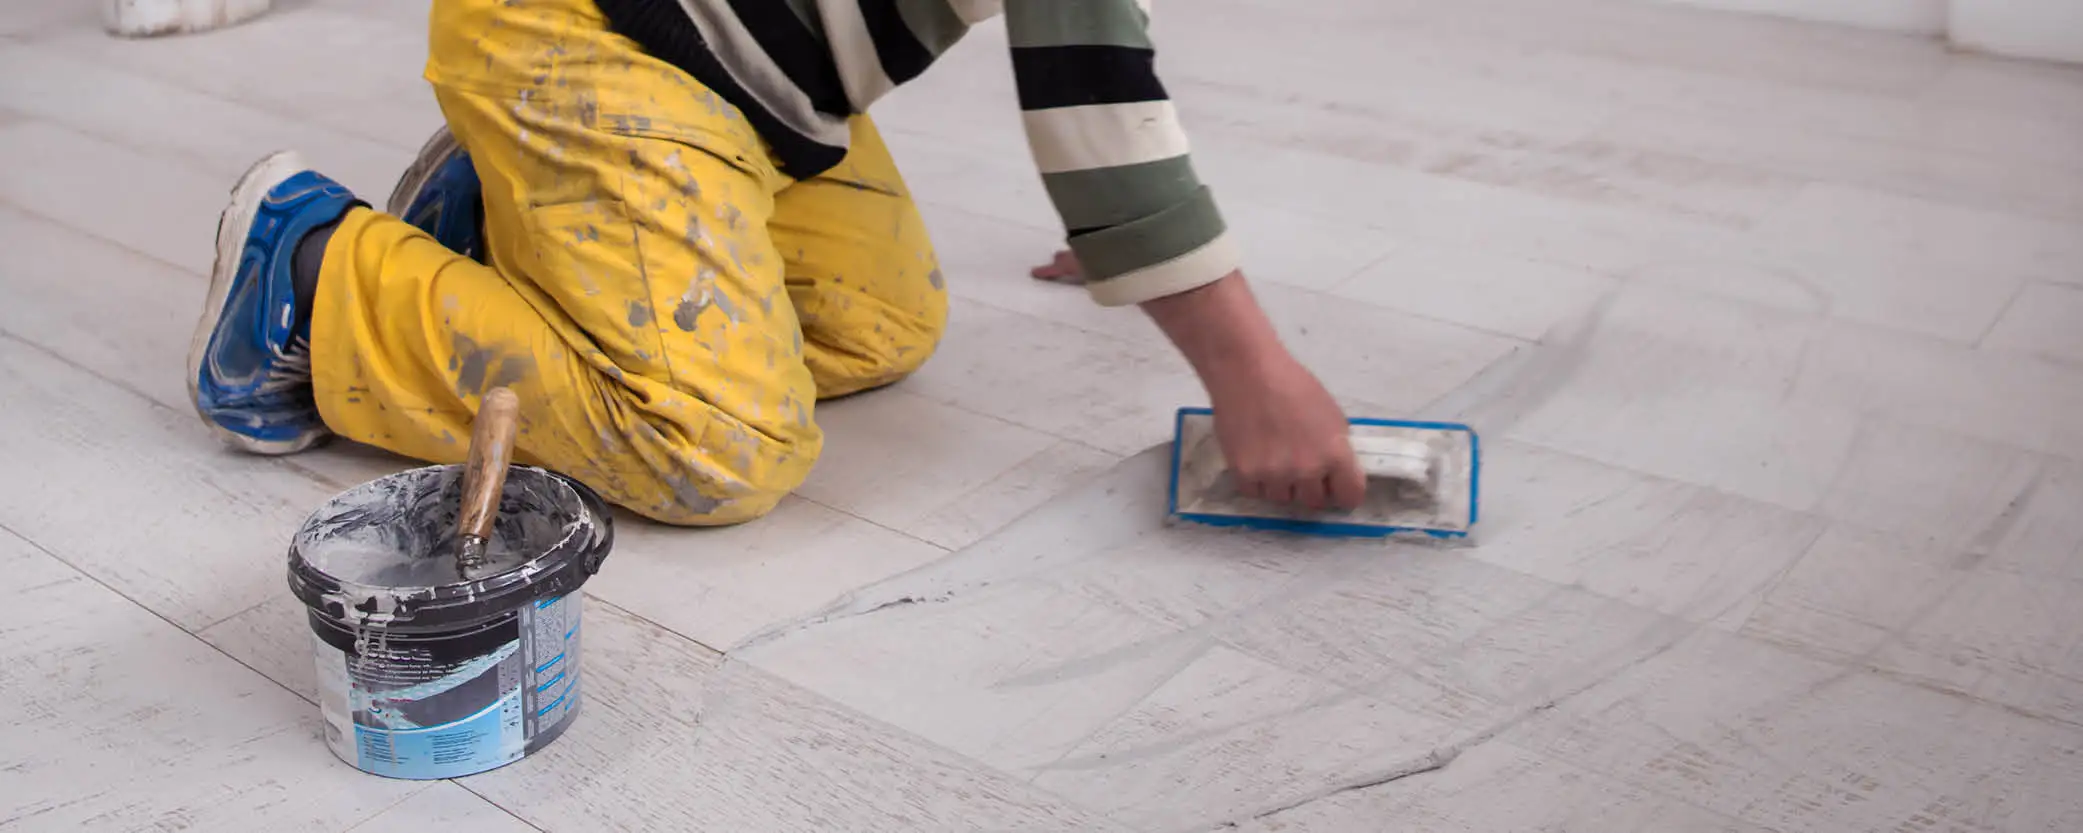 Is Grout Necessary for Tiles?